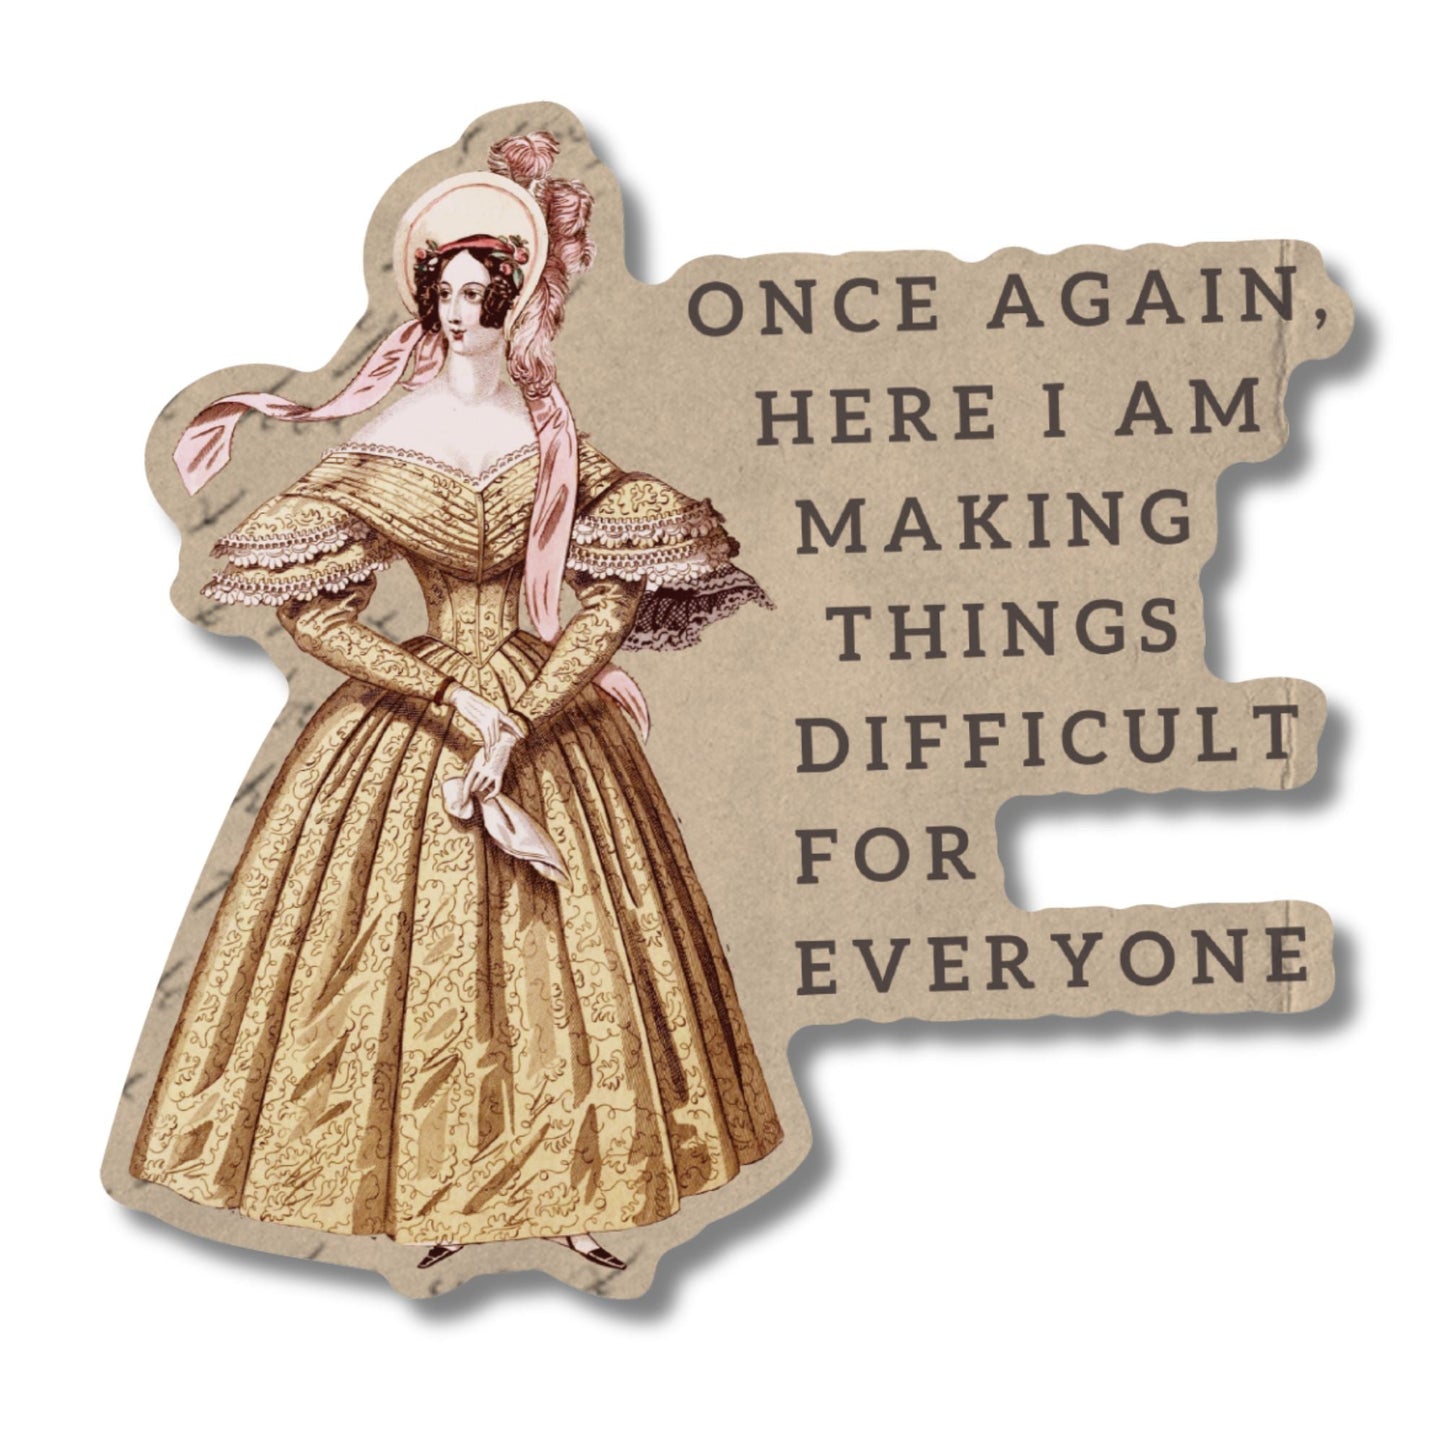 Here I Am Making Things Difficult for Everyone Sticker | Vinyl Die Cut Decal